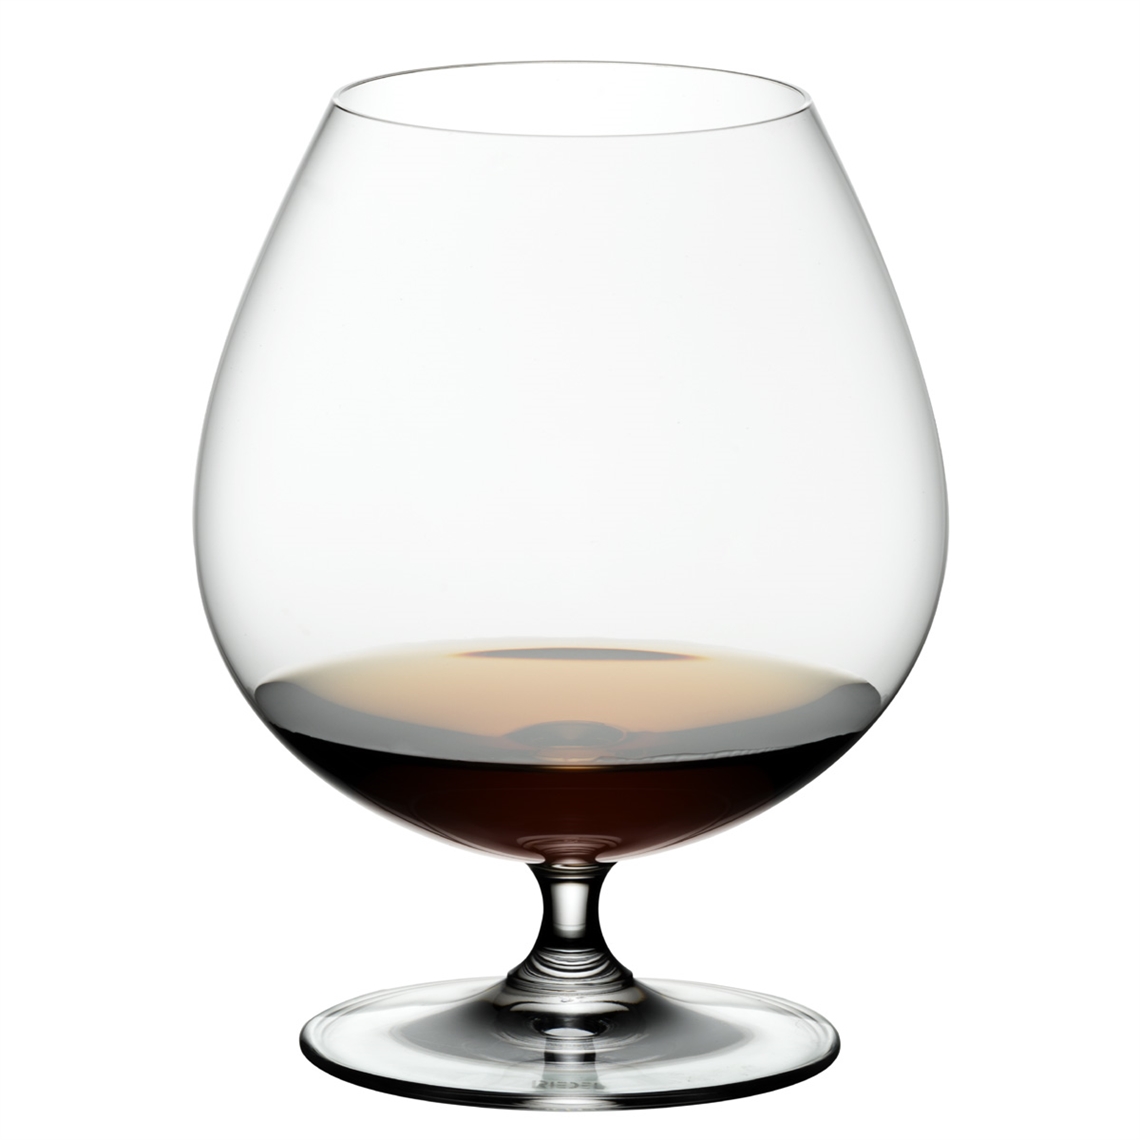 View more wine glasses by region and grape from our Spirit Glasses range